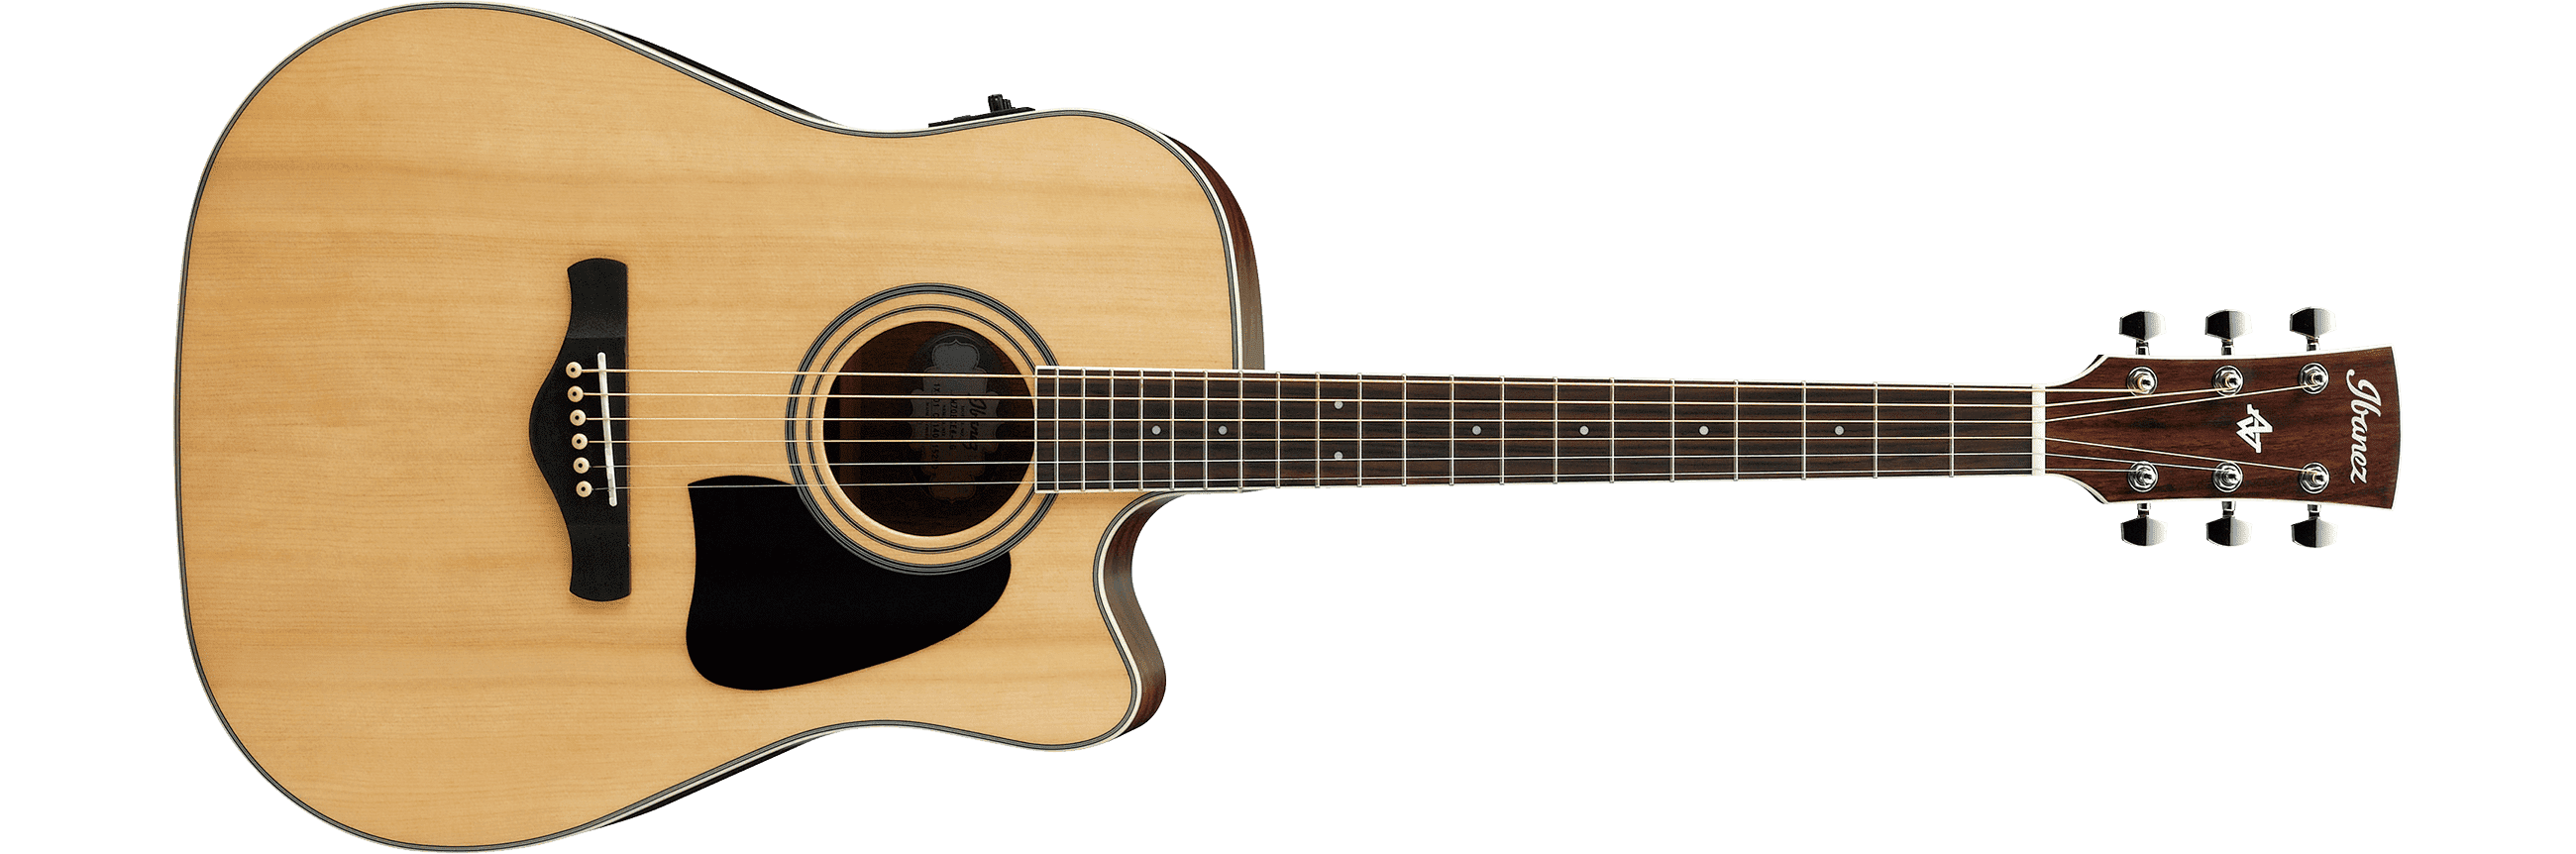 Electro-Acoustic Guitar PNG HD Quality